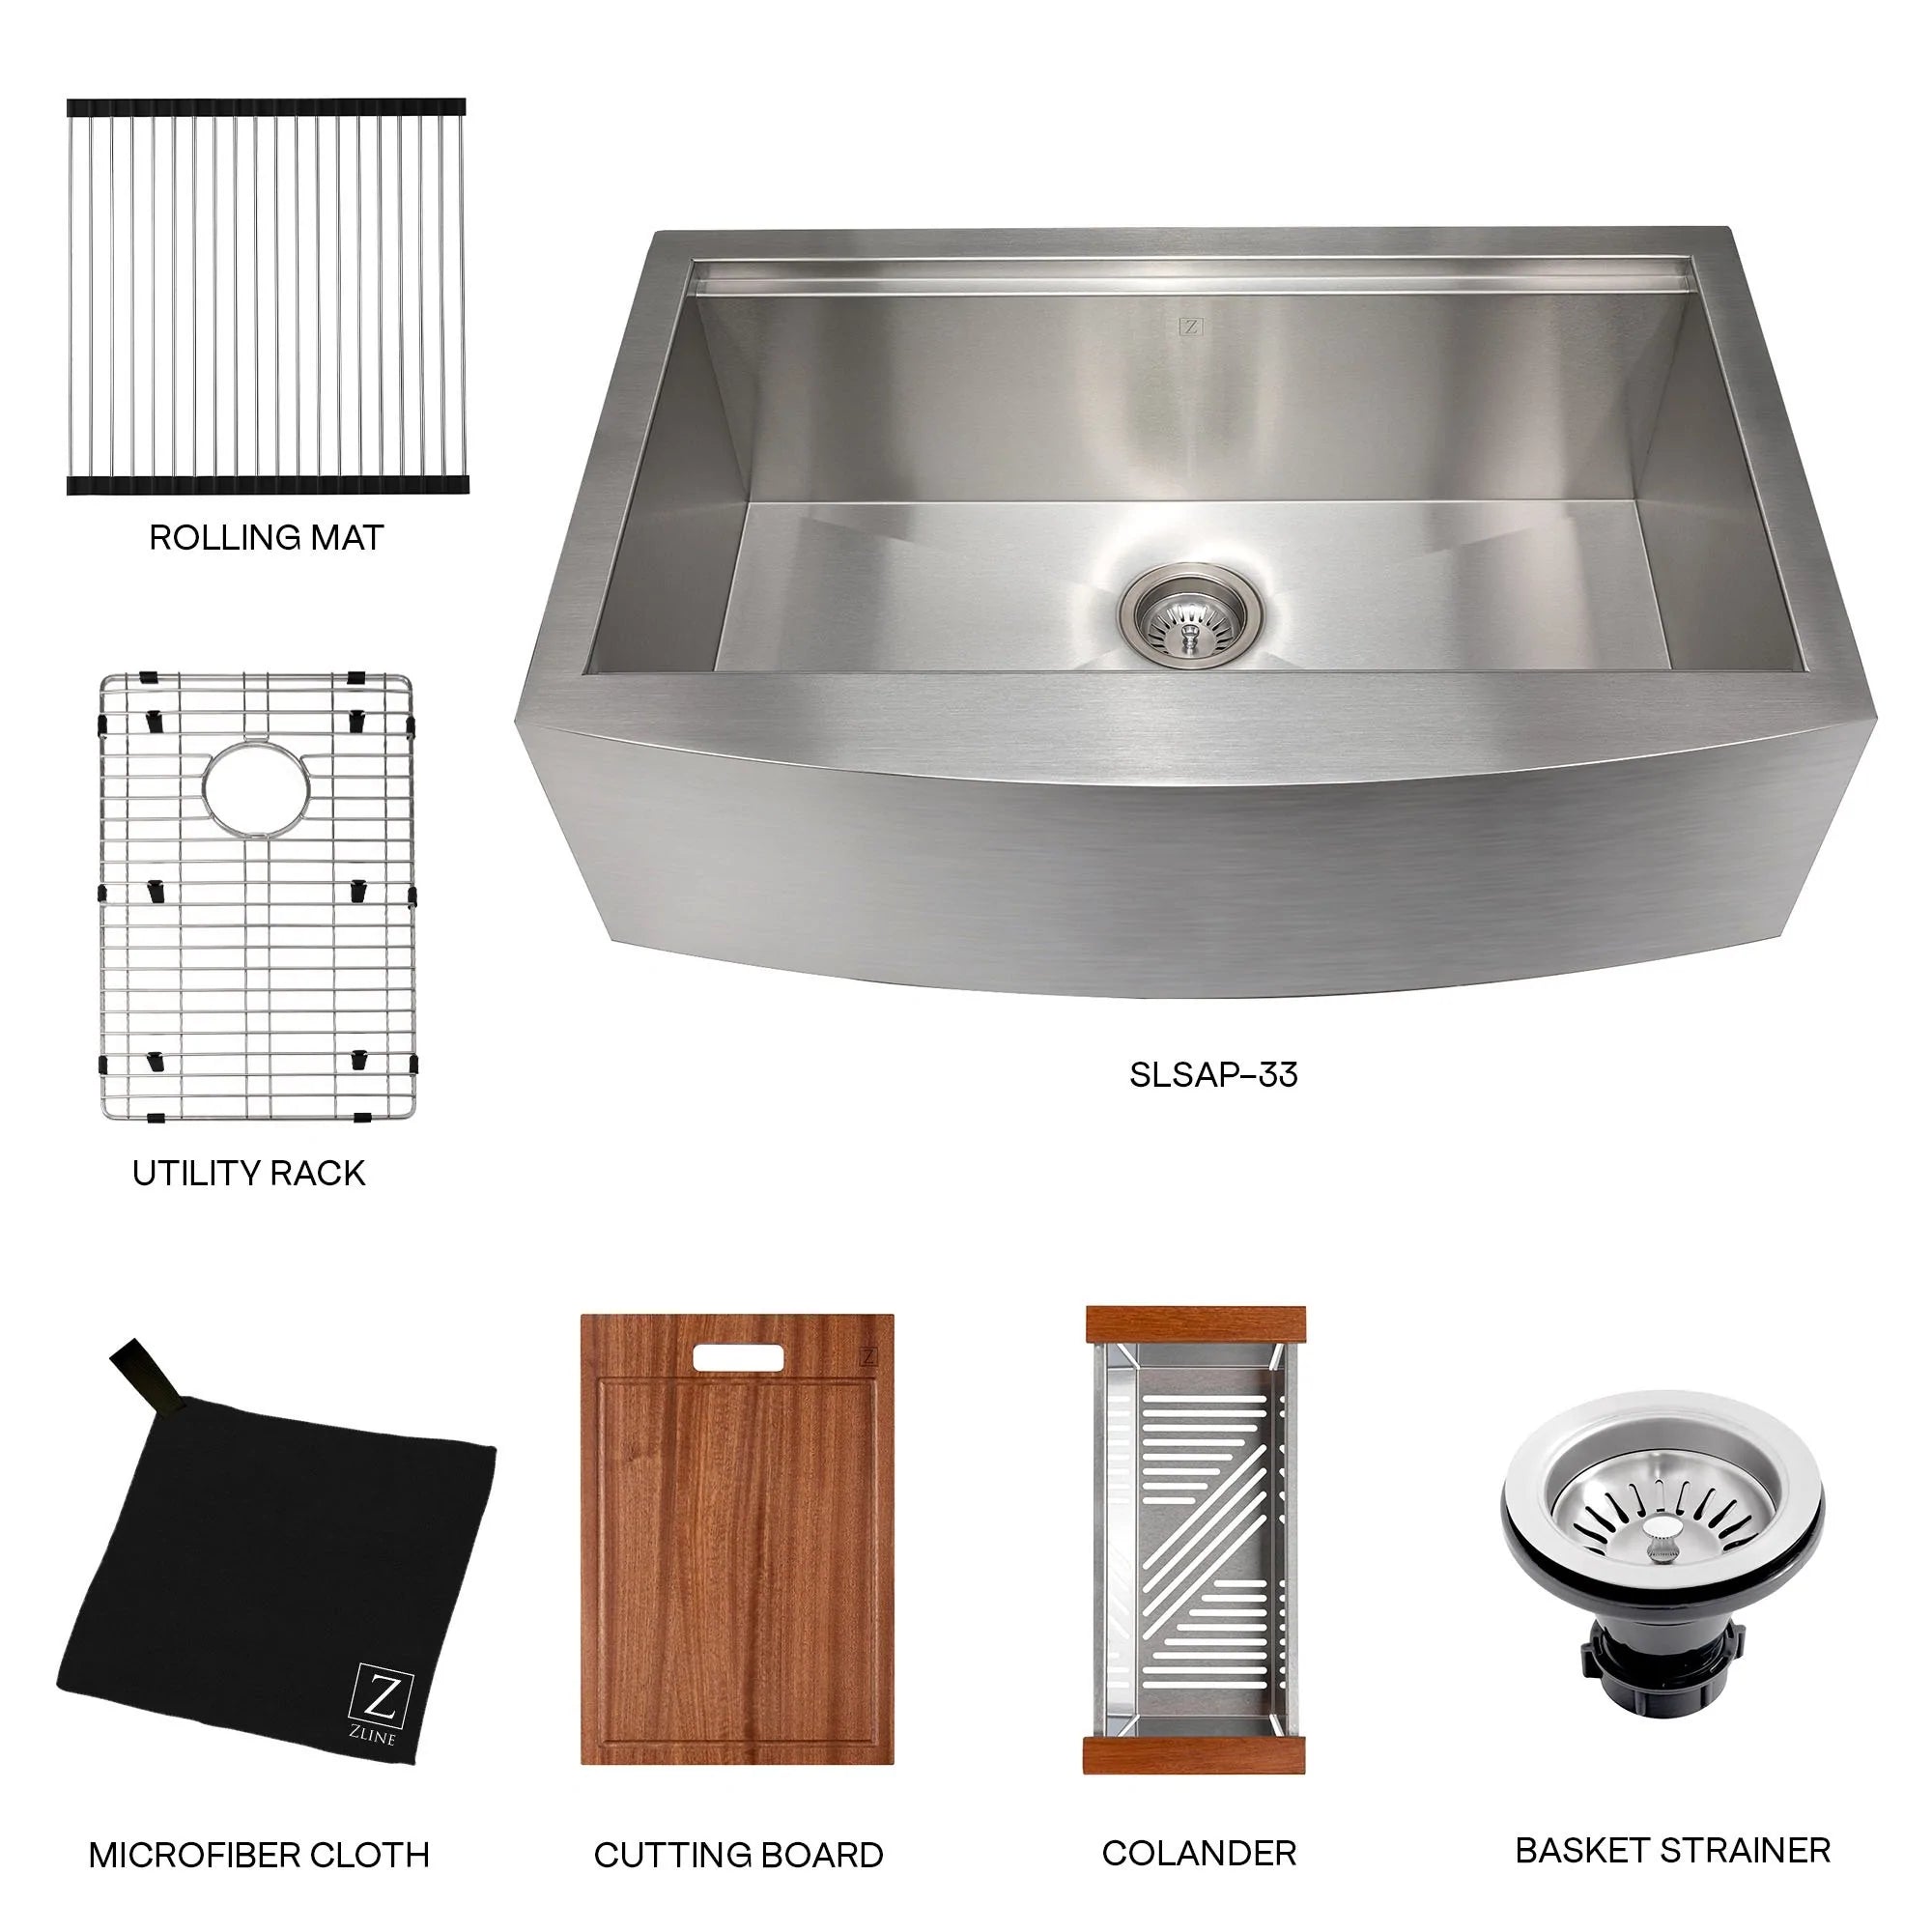 ZLINE 33" Moritz Farmhouse Apron Mount Single Bowl Scratch Resistant Stainless Steel Kitchen Sink with Bottom Grid and Accessories (SLSAP-33S)